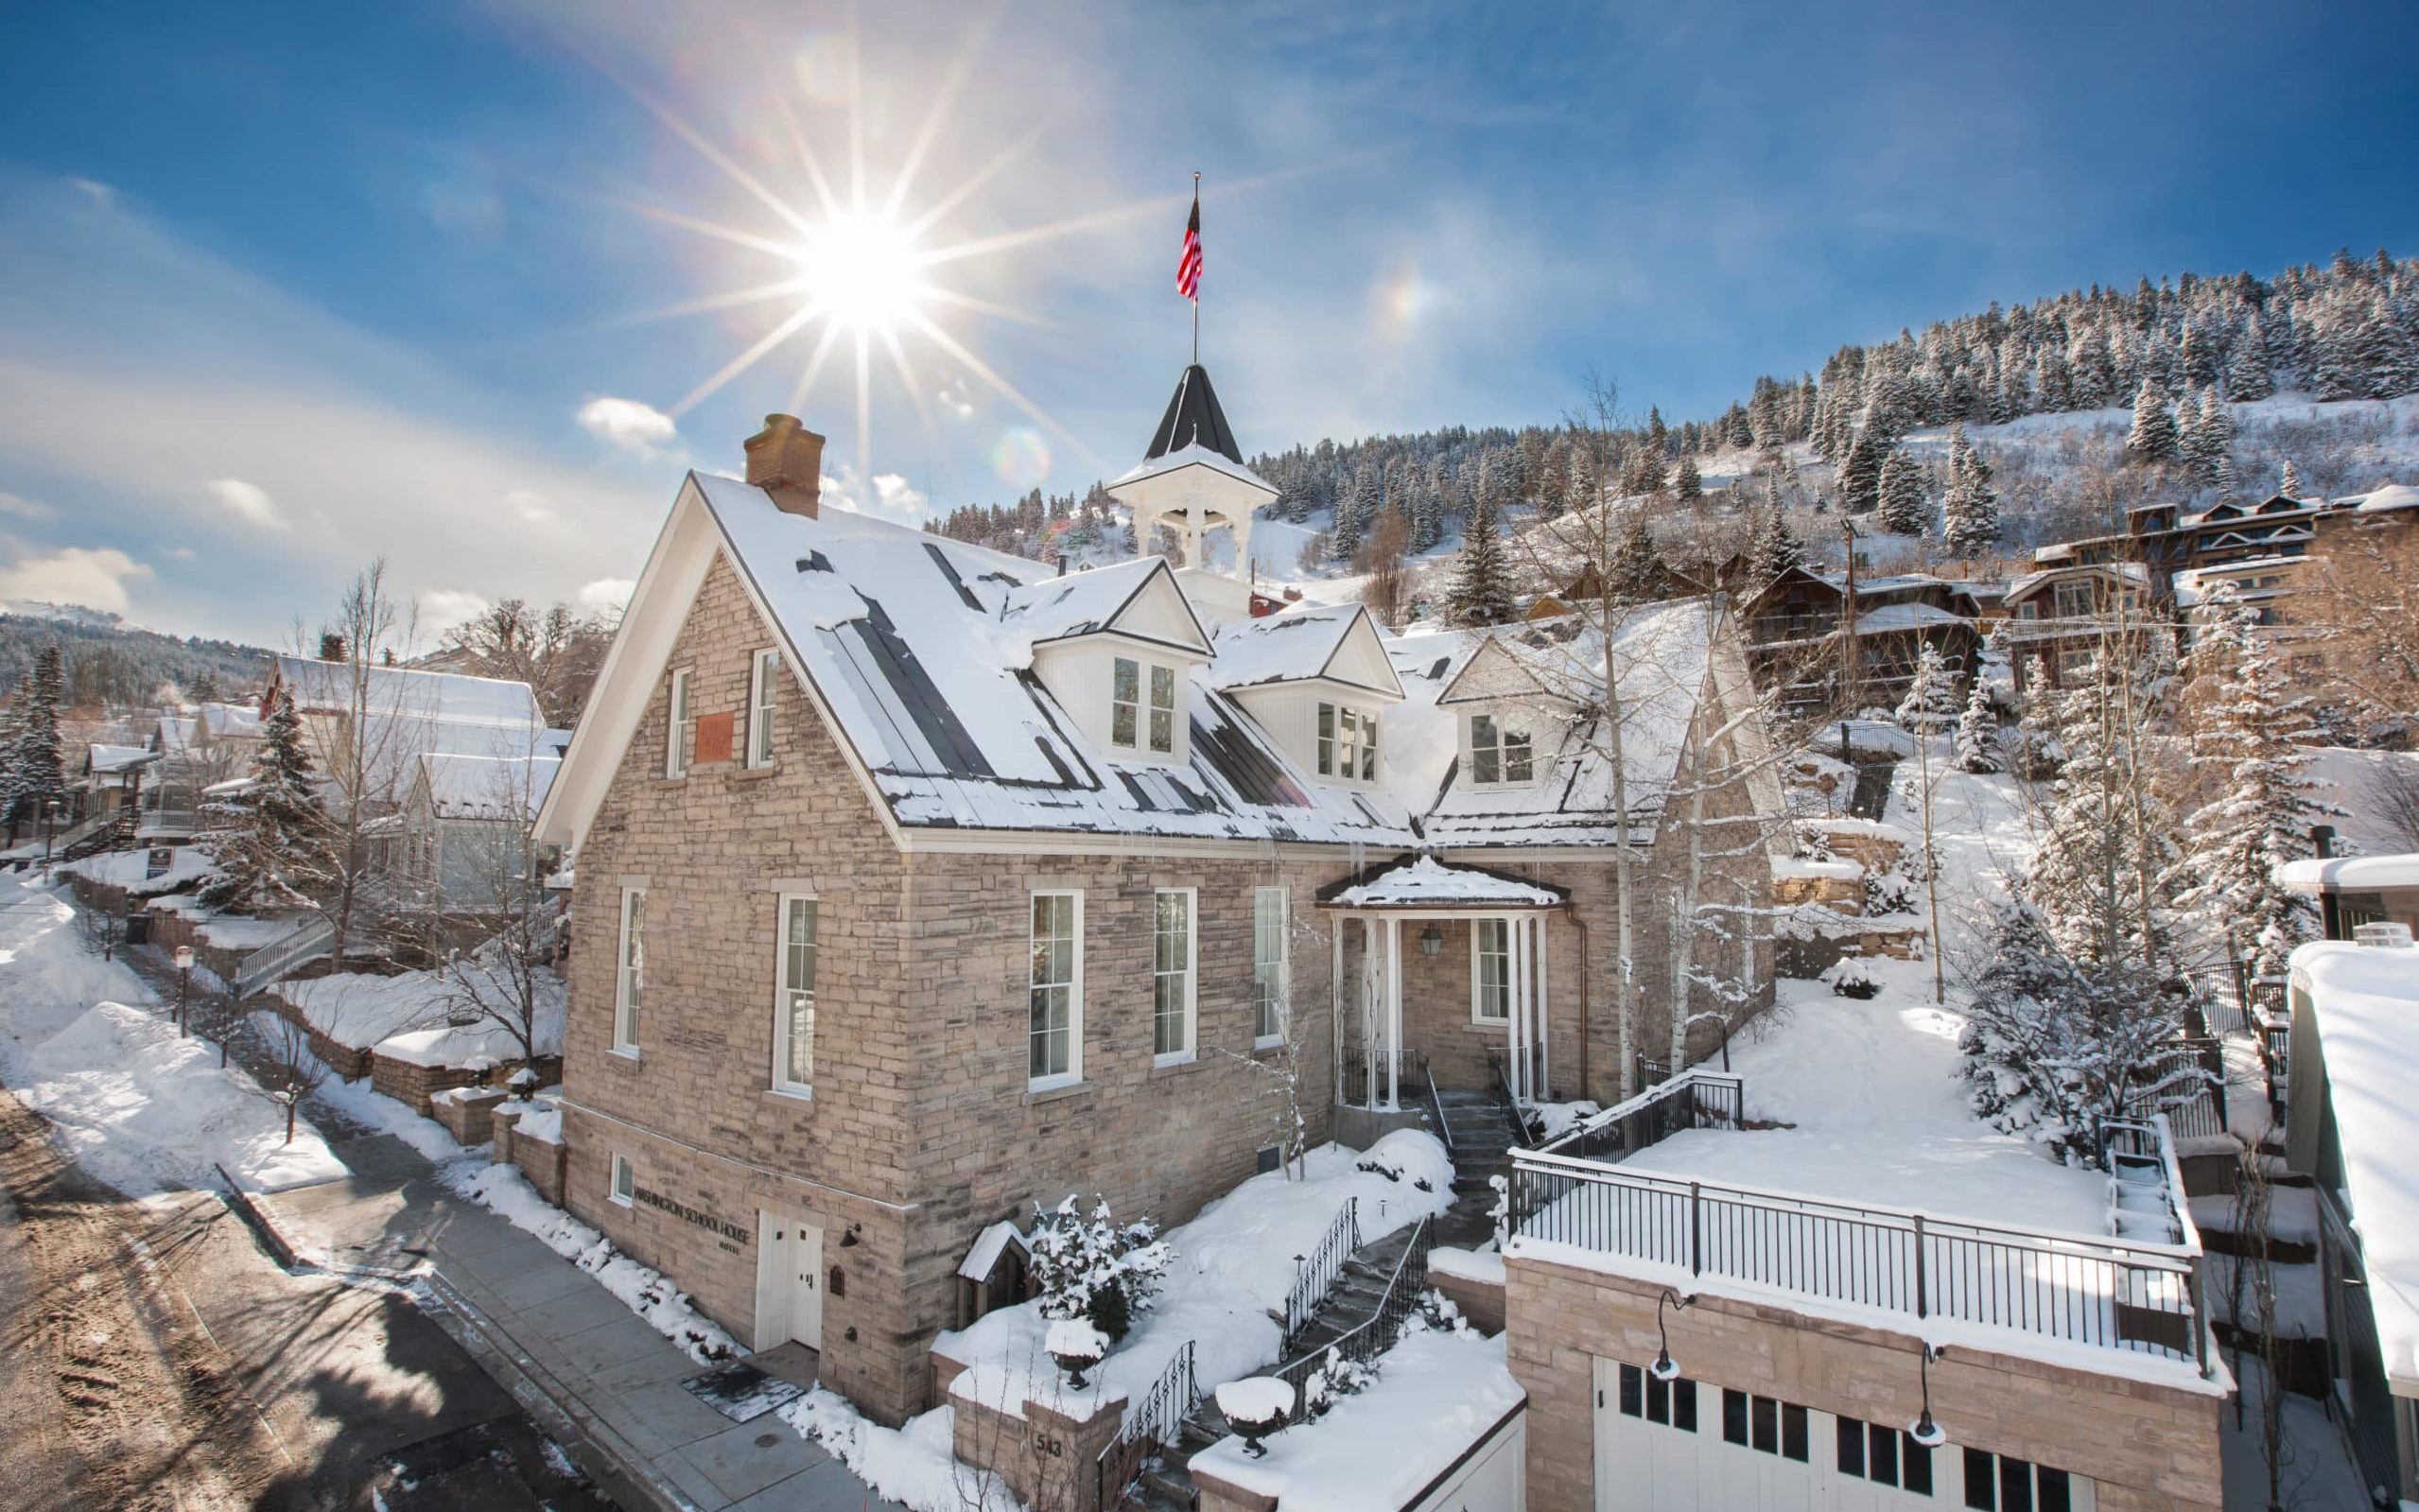 This Intimate Boutique Hotel Inside an Old School House in Park City is a Masterclass in Refined Design